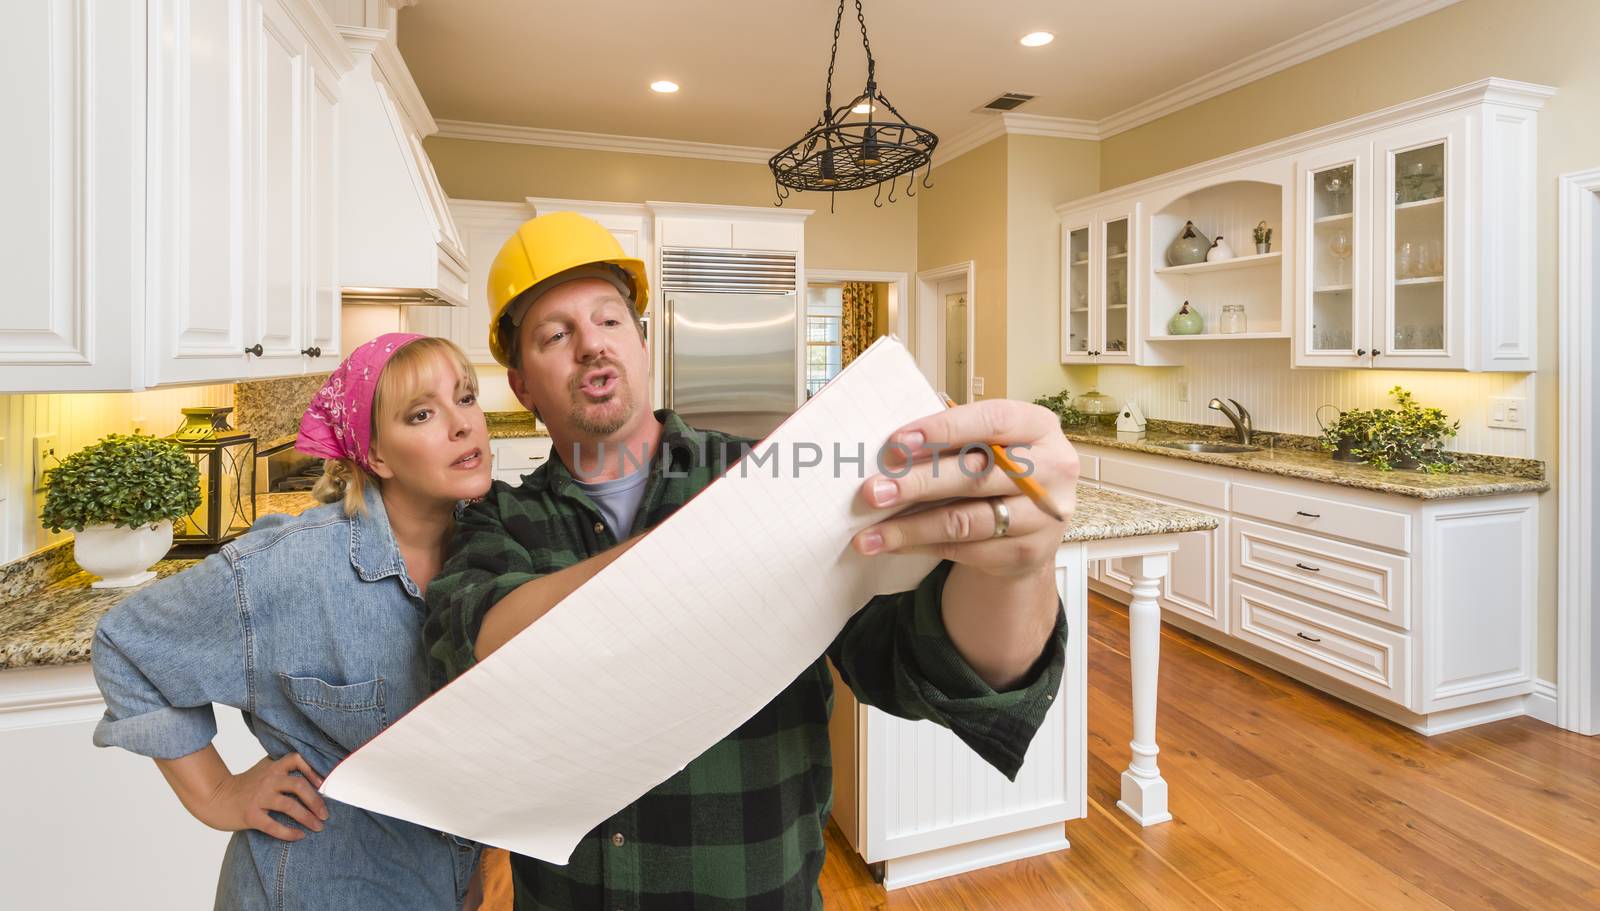 Male Contractor in Hard Hat Discussing Plans with Woman in Custom Kitchen Interior.